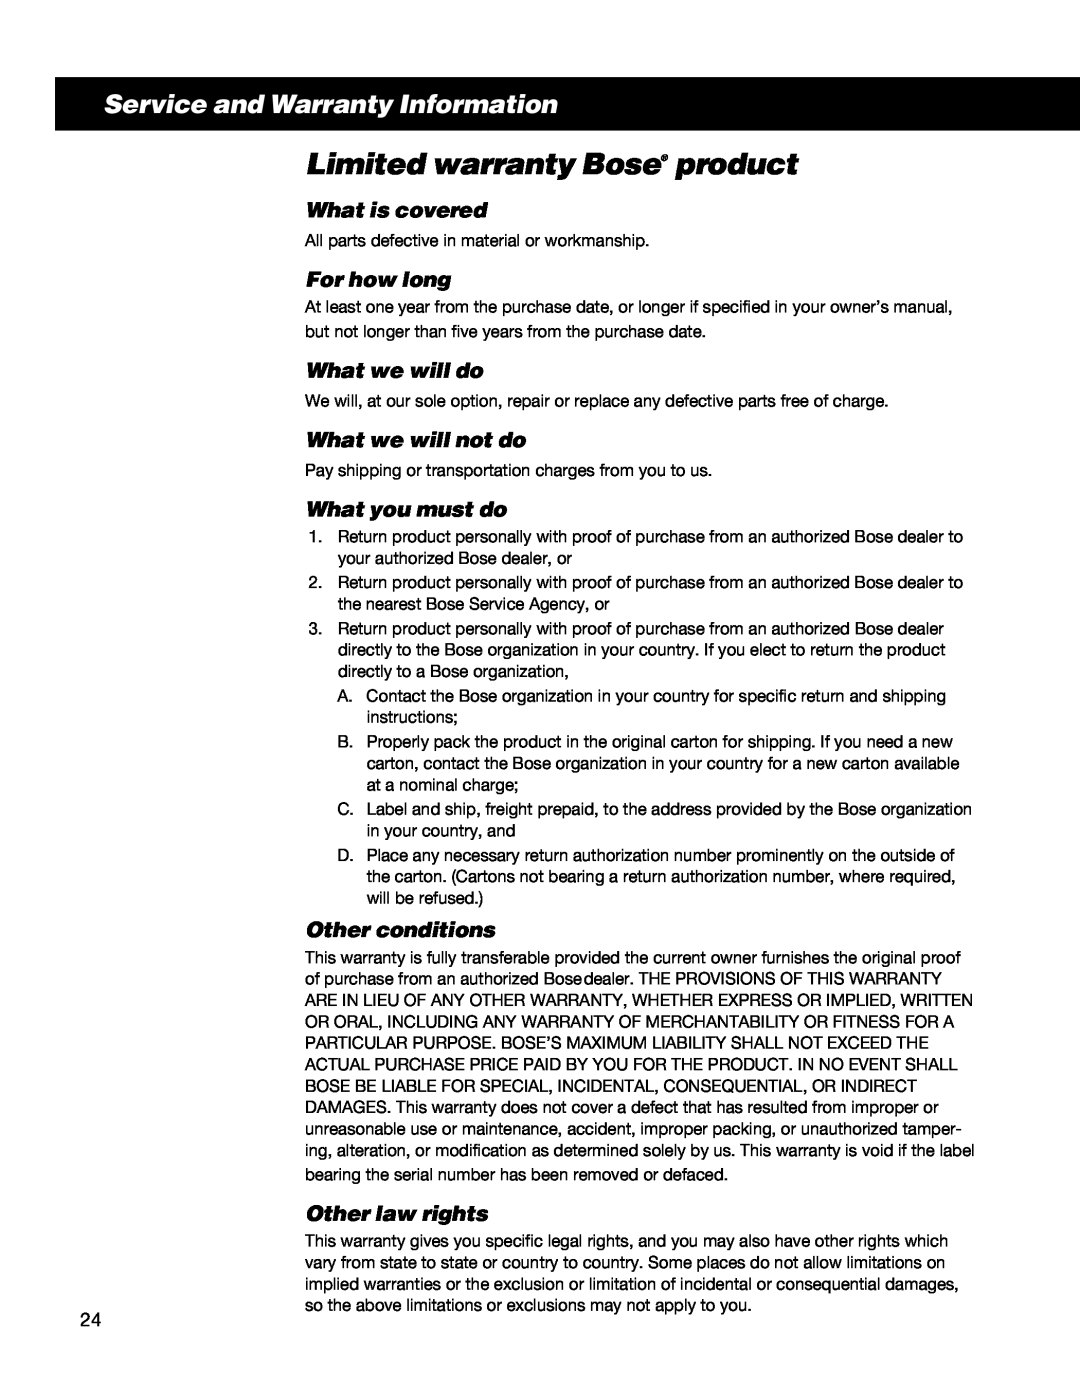 Bose II manual Limited warranty Bose product, What is covered, For how long, What we will do, What we will not do 